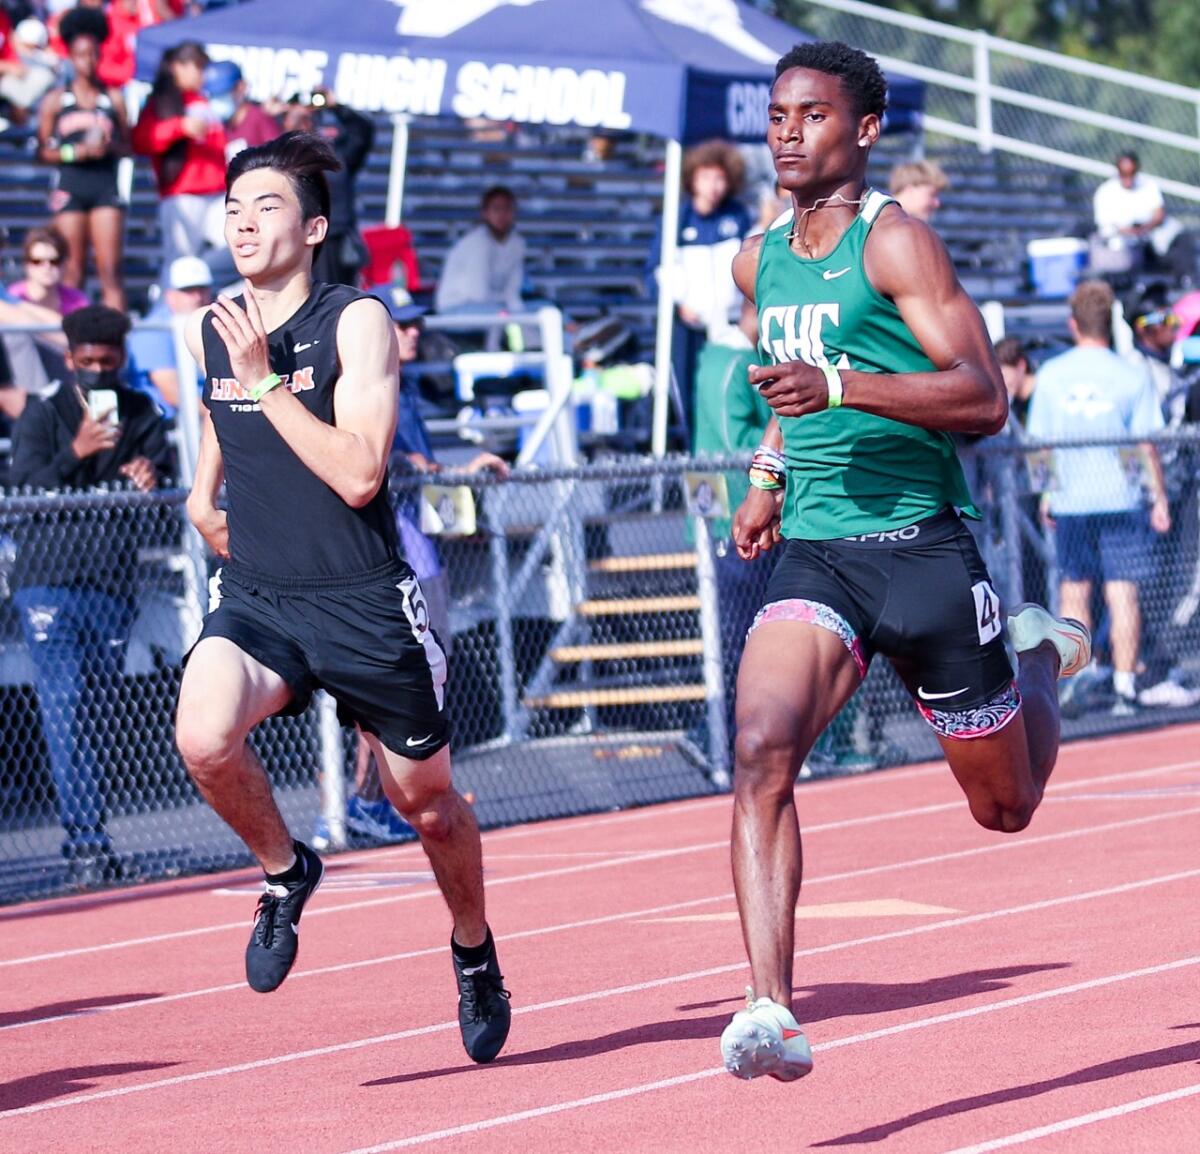 Dijon Stanley of Granada Hills (right) goes past Jaden Rattay of Lincoln to win the 400 in 46.94,